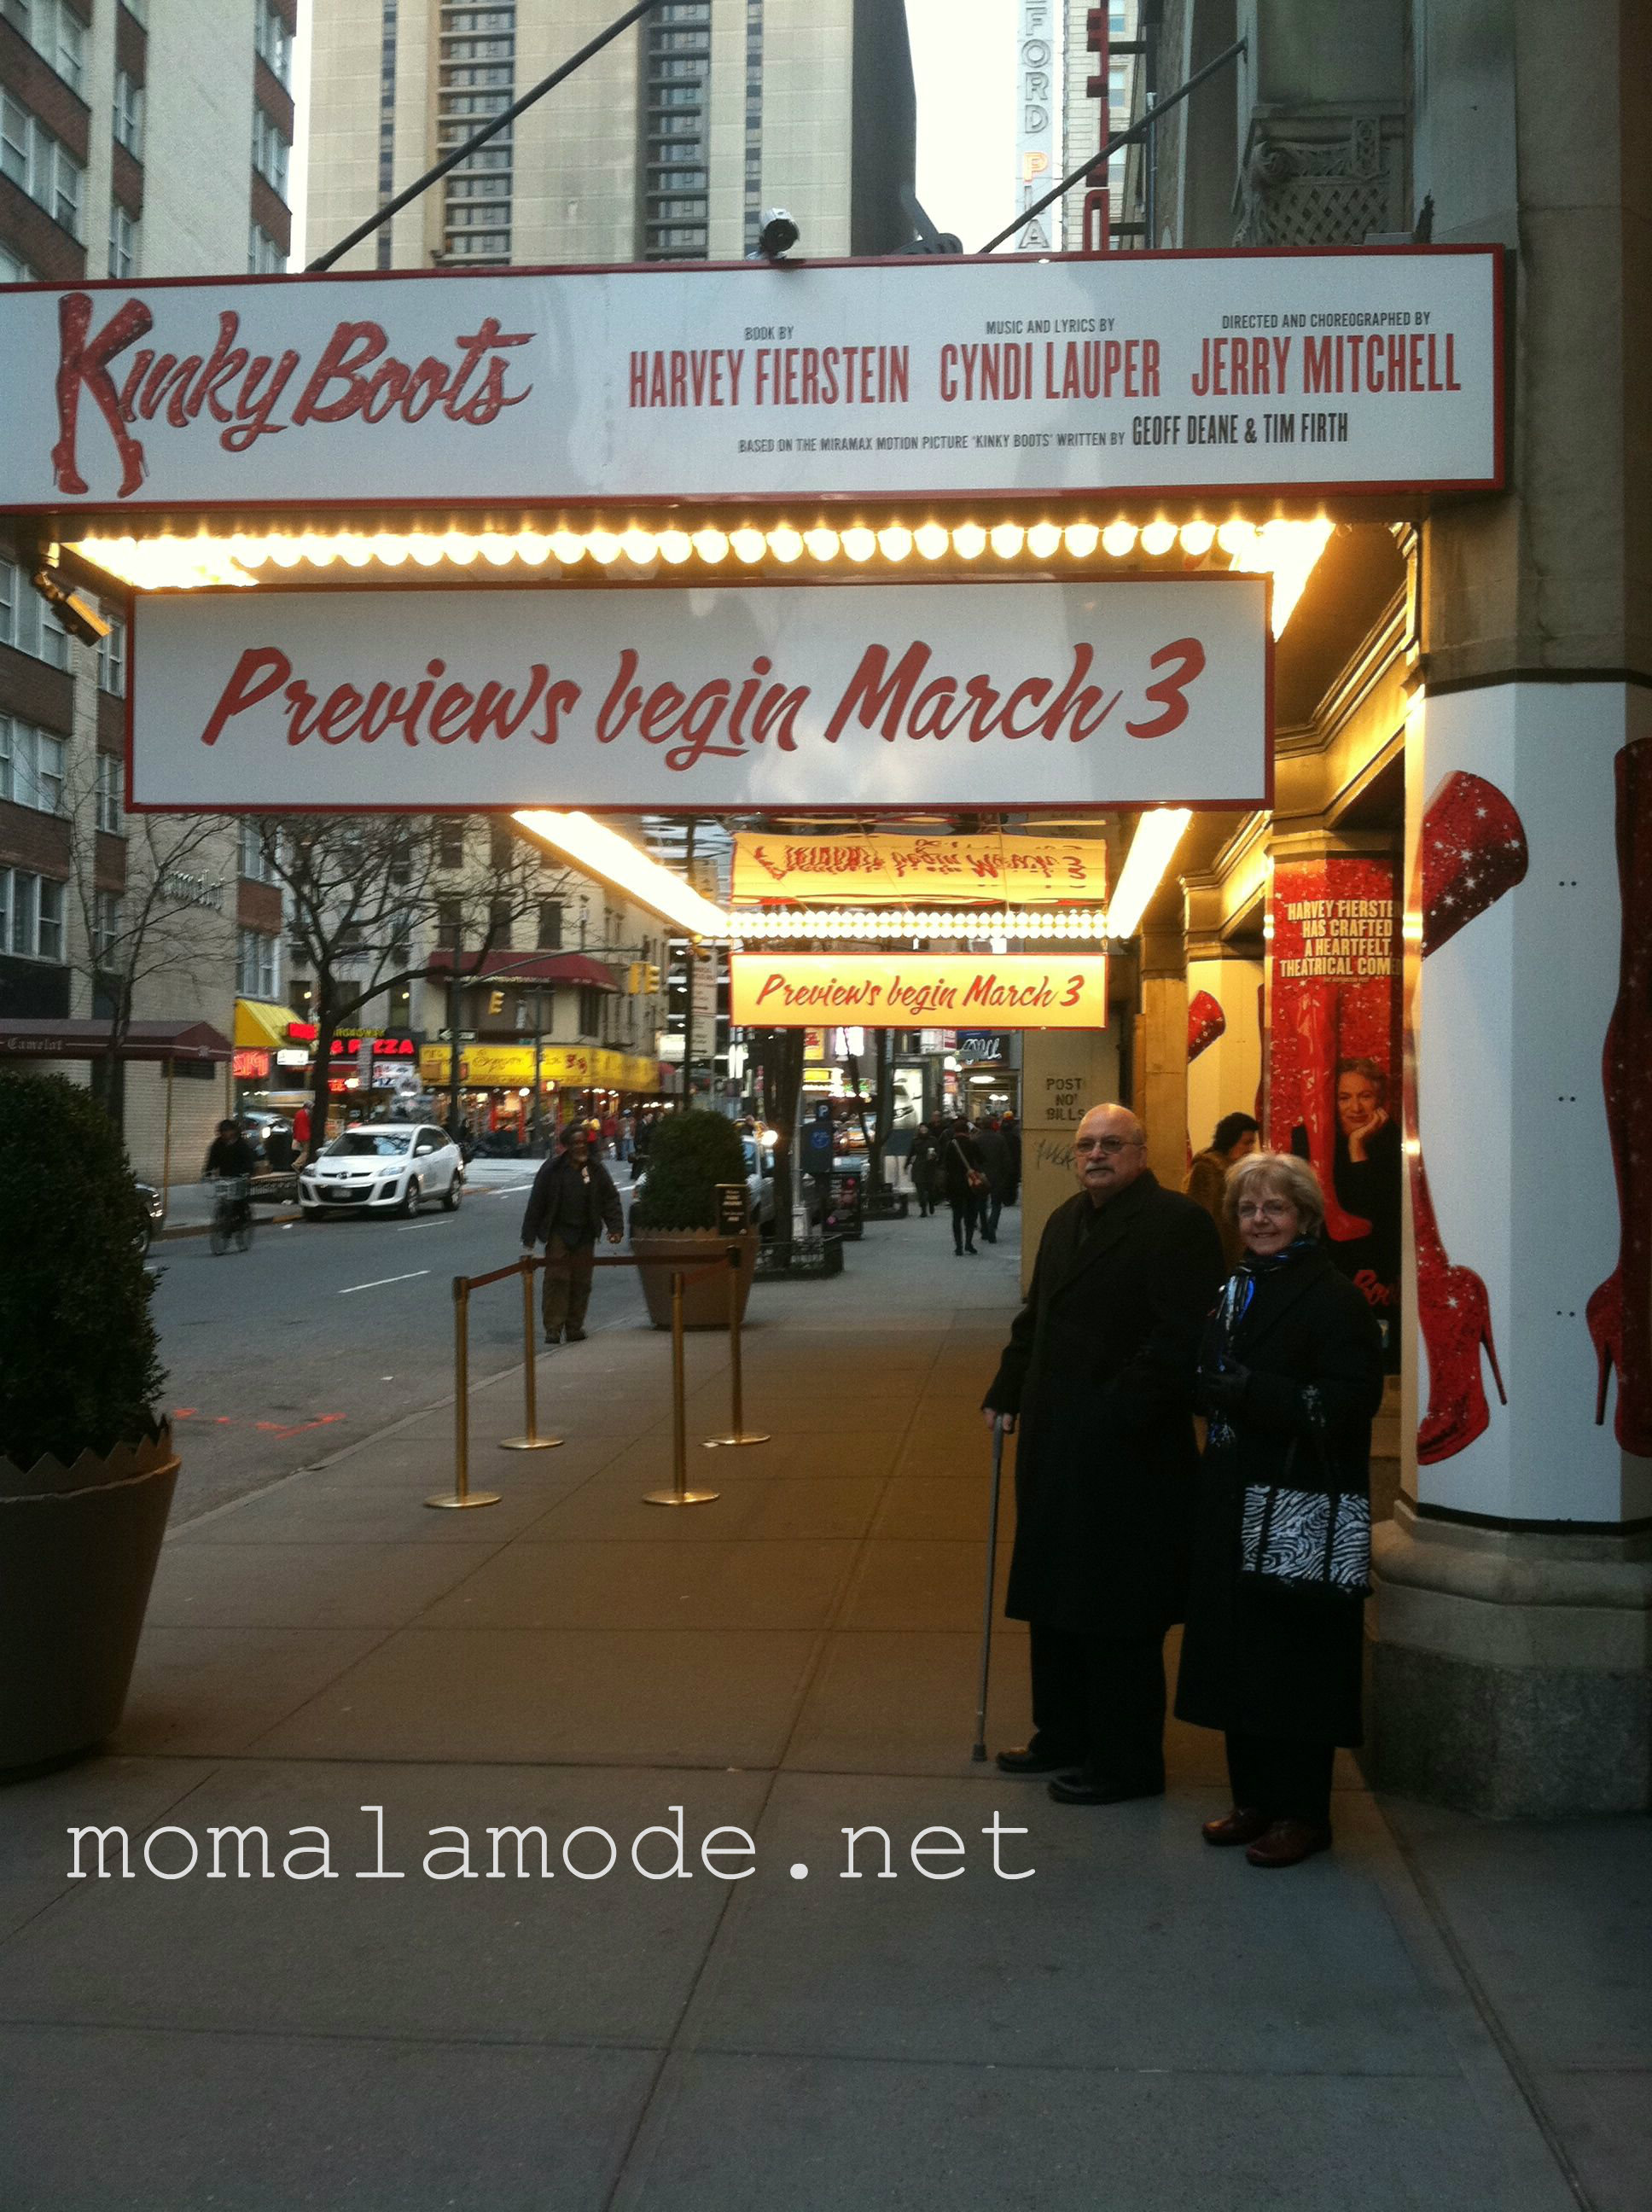 My parents outside of the Hirschfeld Theatre